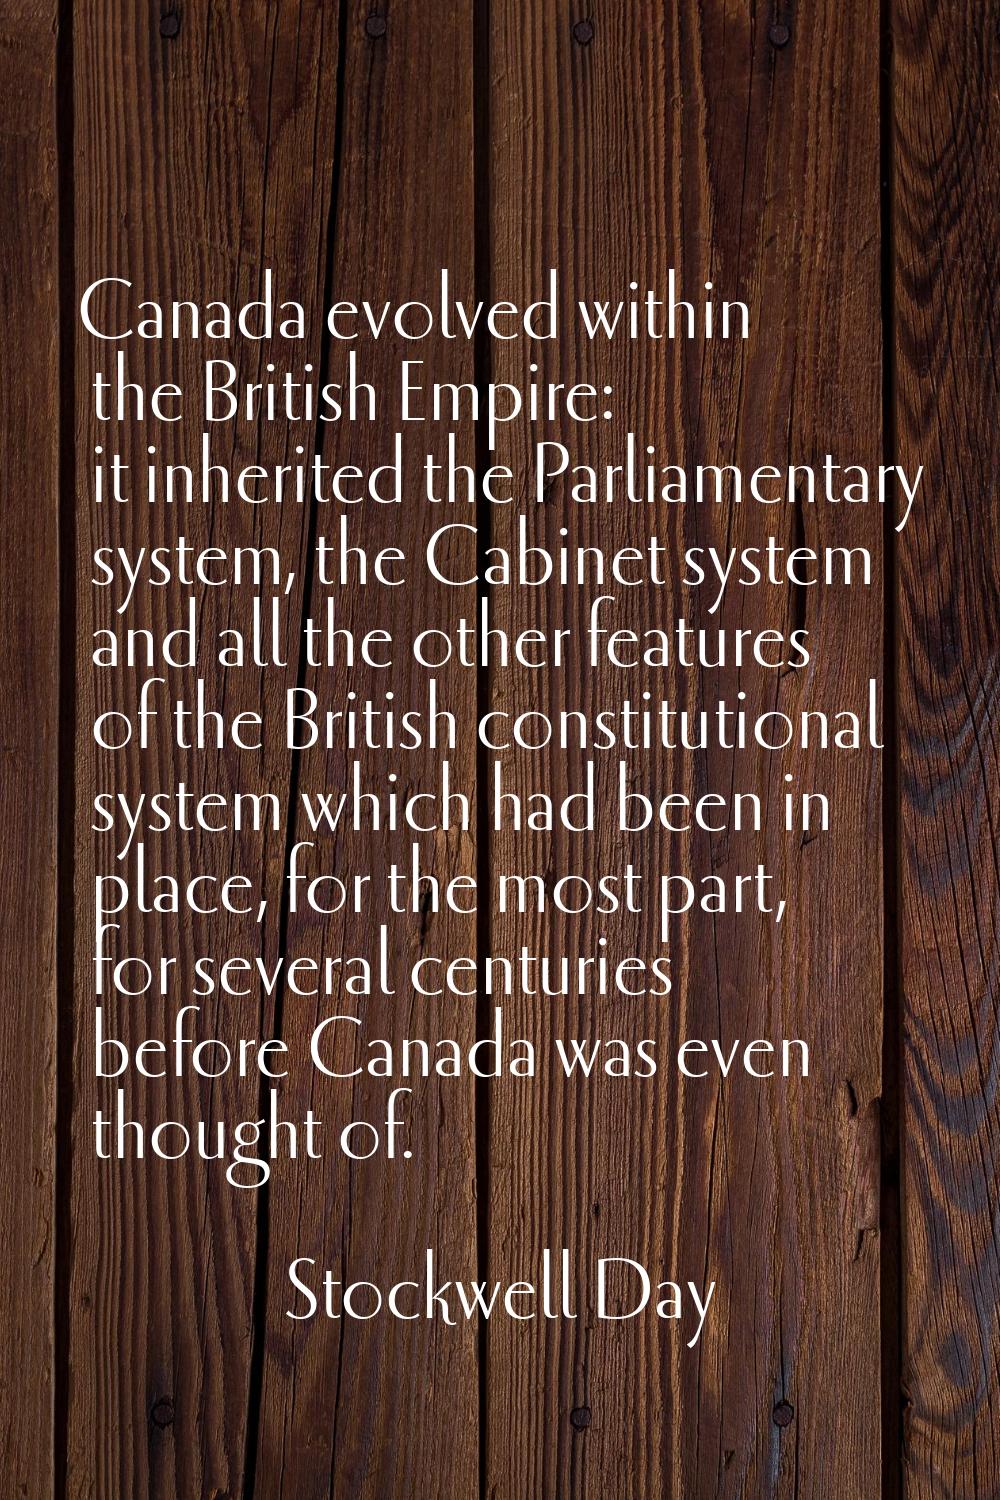 Canada evolved within the British Empire: it inherited the Parliamentary system, the Cabinet system